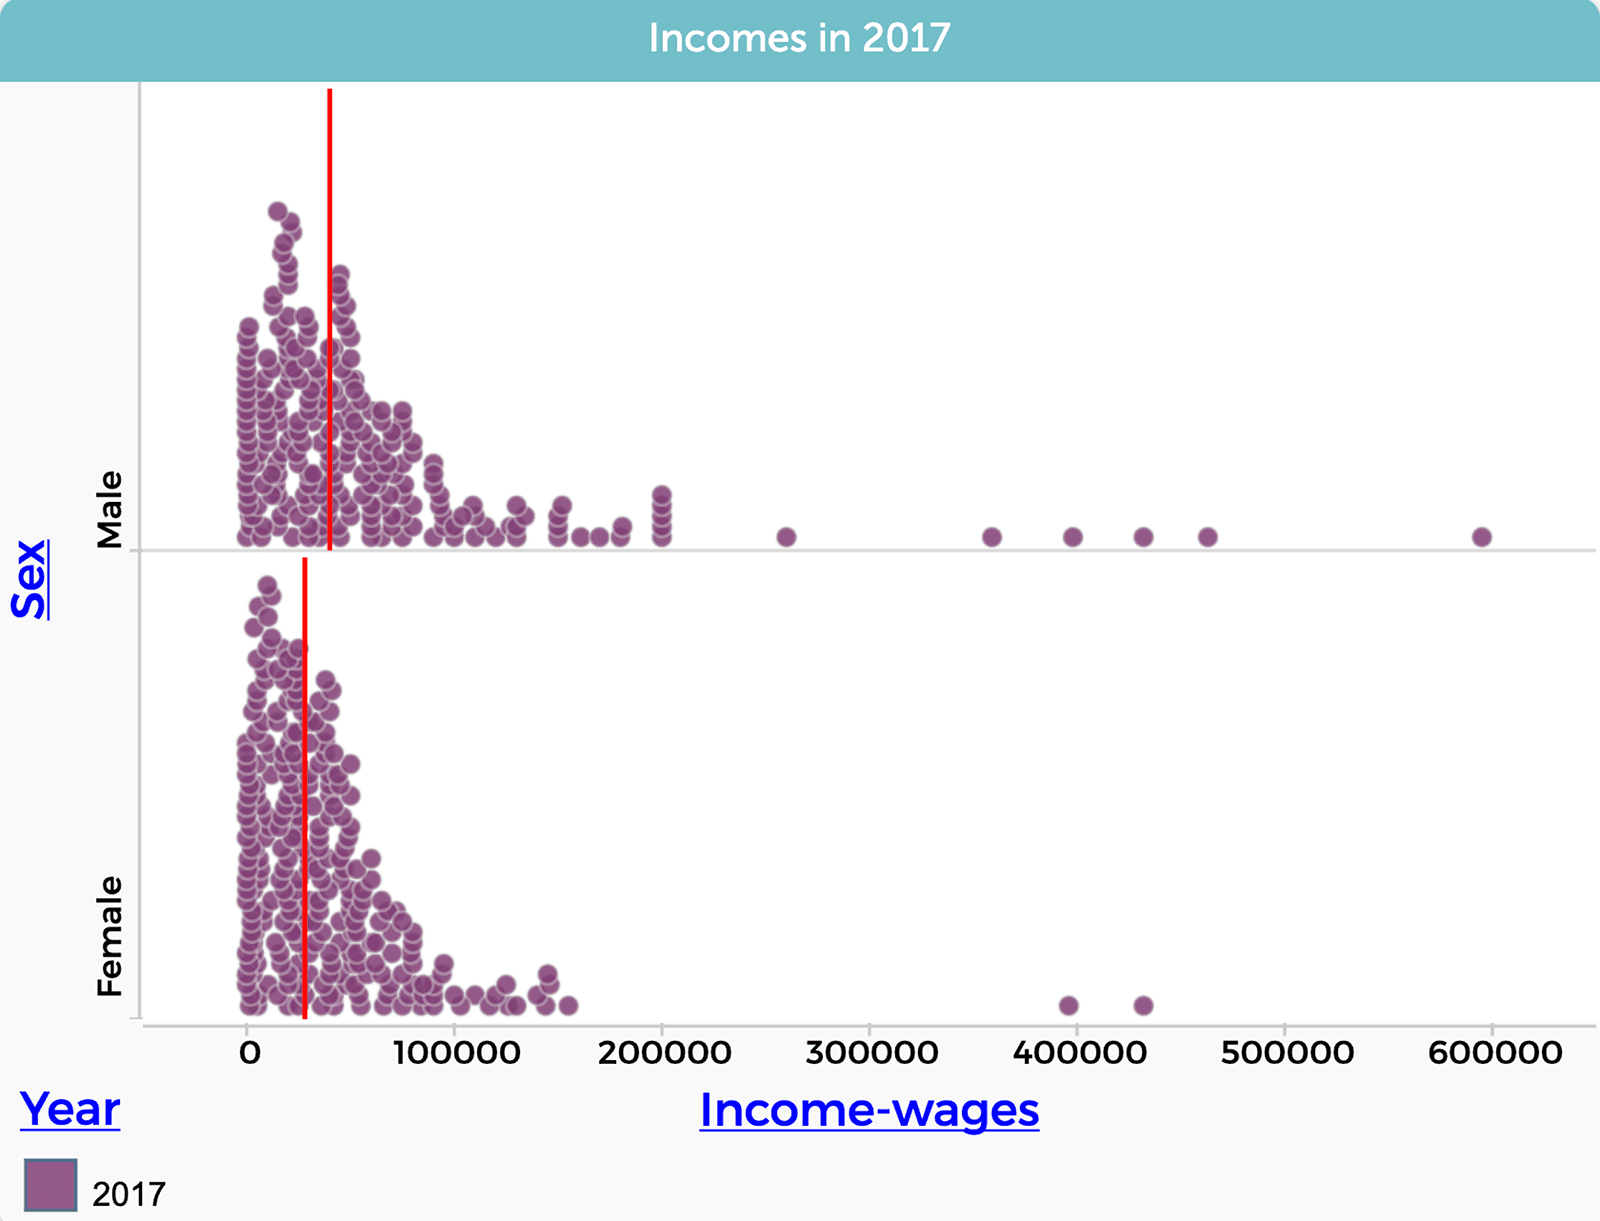 Graph of male income versus female income from 2017 census data, with median income shown as a red line.